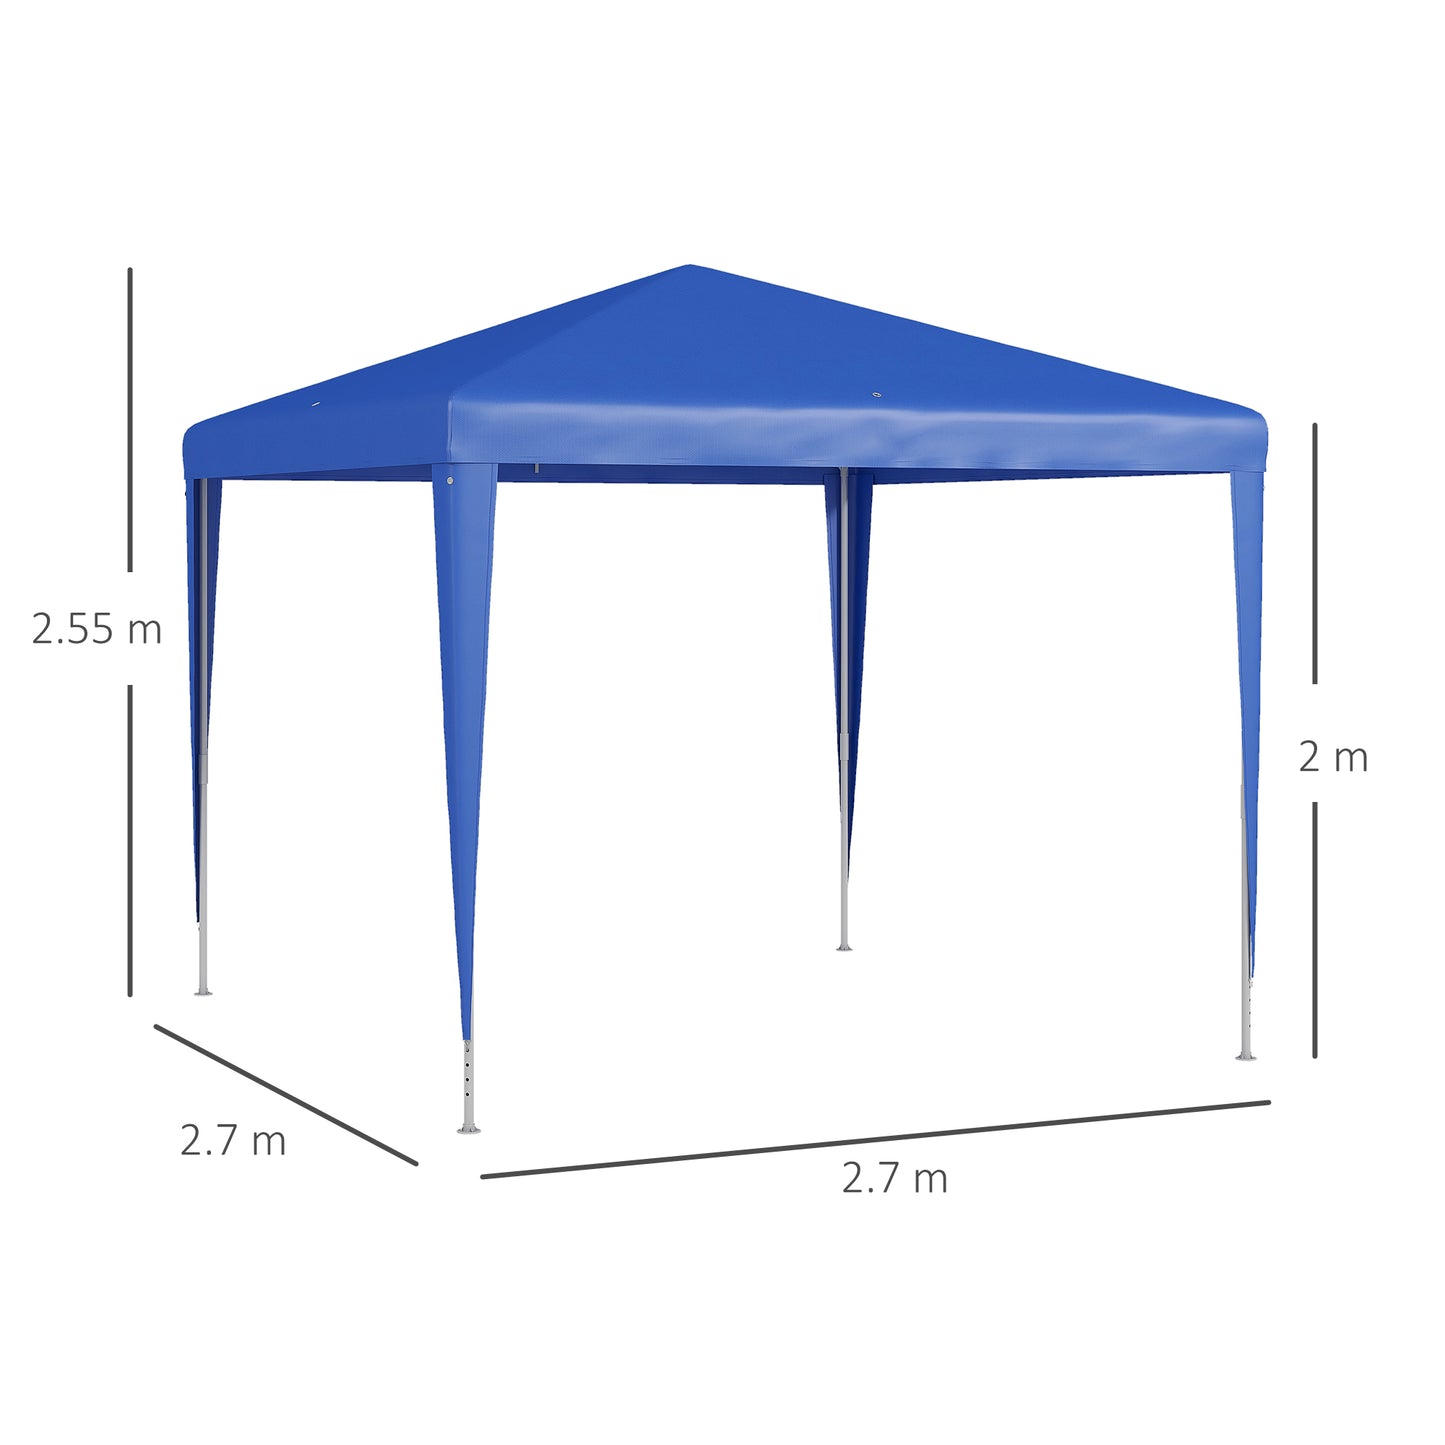 Outsunny 2.7m x 2.7m Garden Gazebo Marquee Party Tent Wedding Canopy Outdoor(Blue)